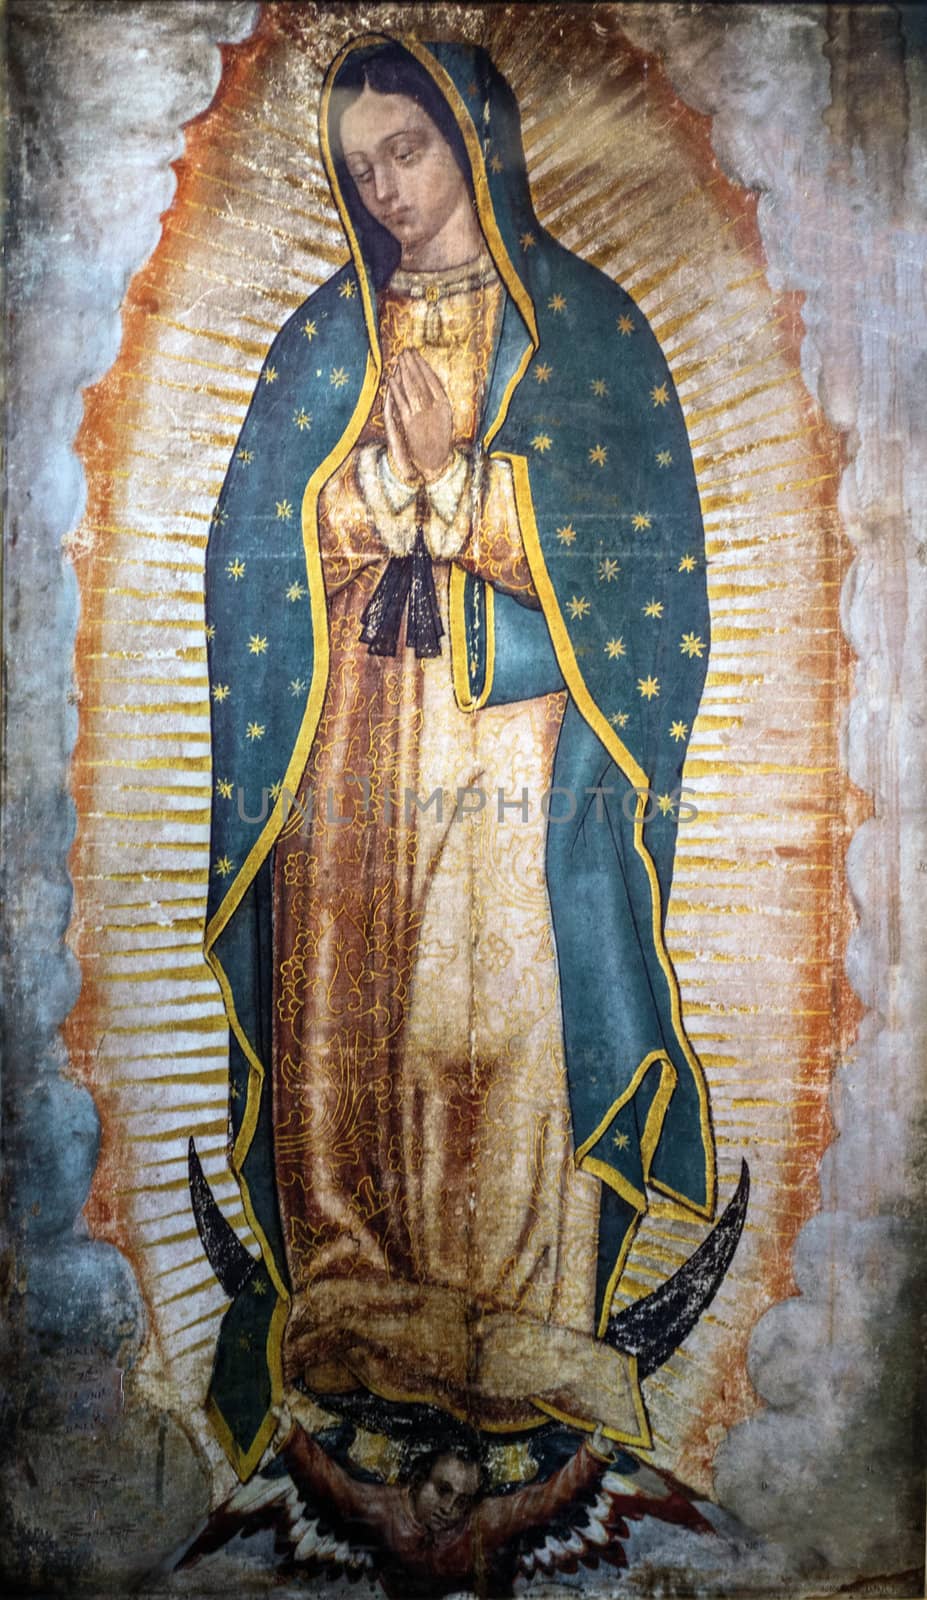 Image of Our Lady of Guadalupe in the New Basilica, Mexico